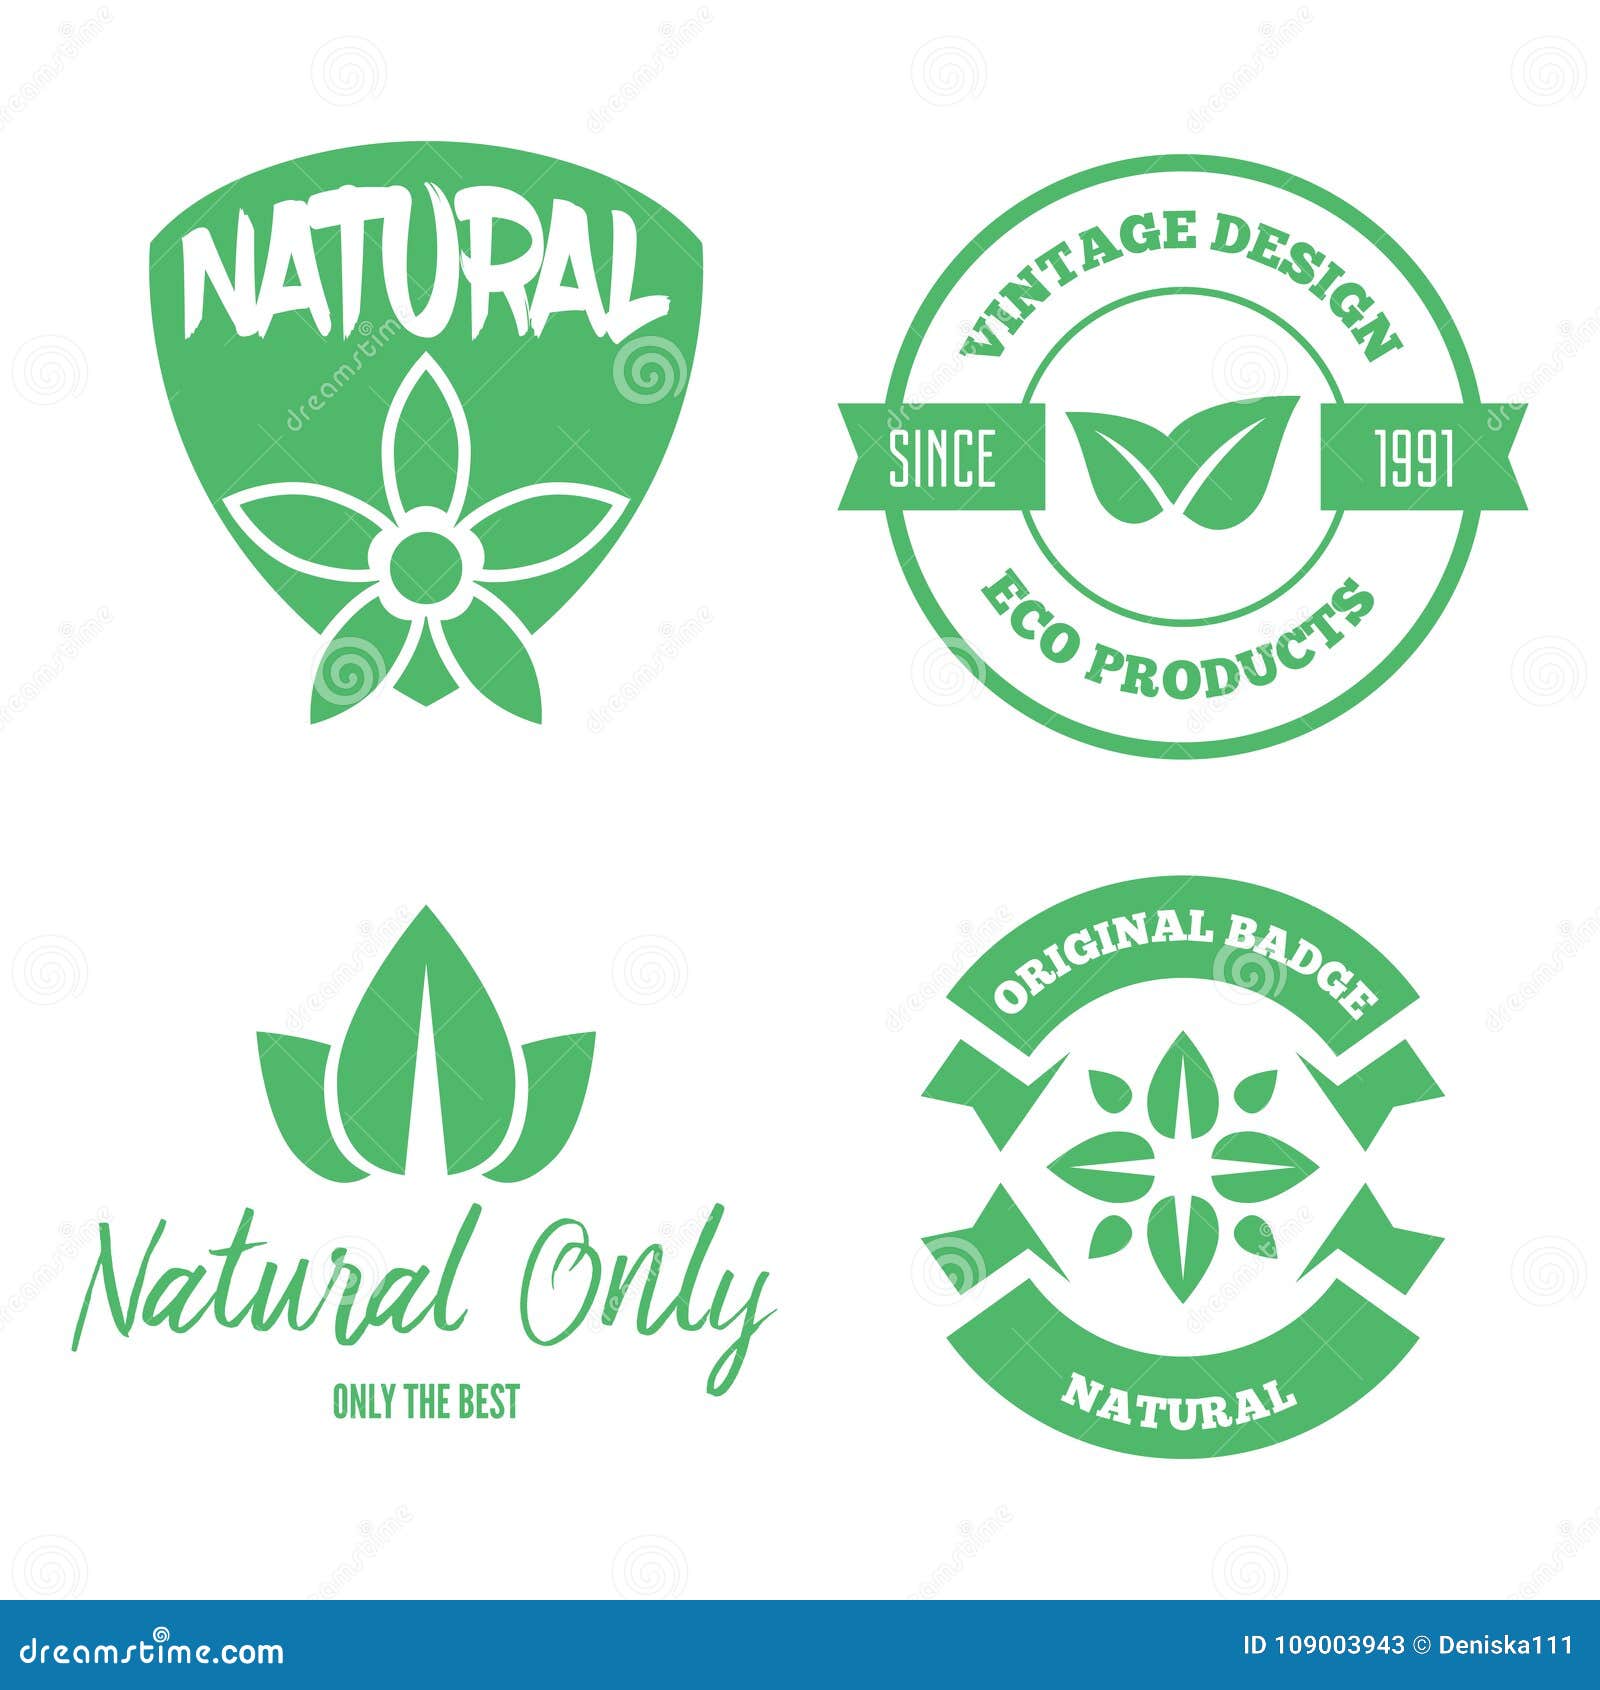  health and beauty care logos or labels. tags and s set for organic cosmetics, natural products.